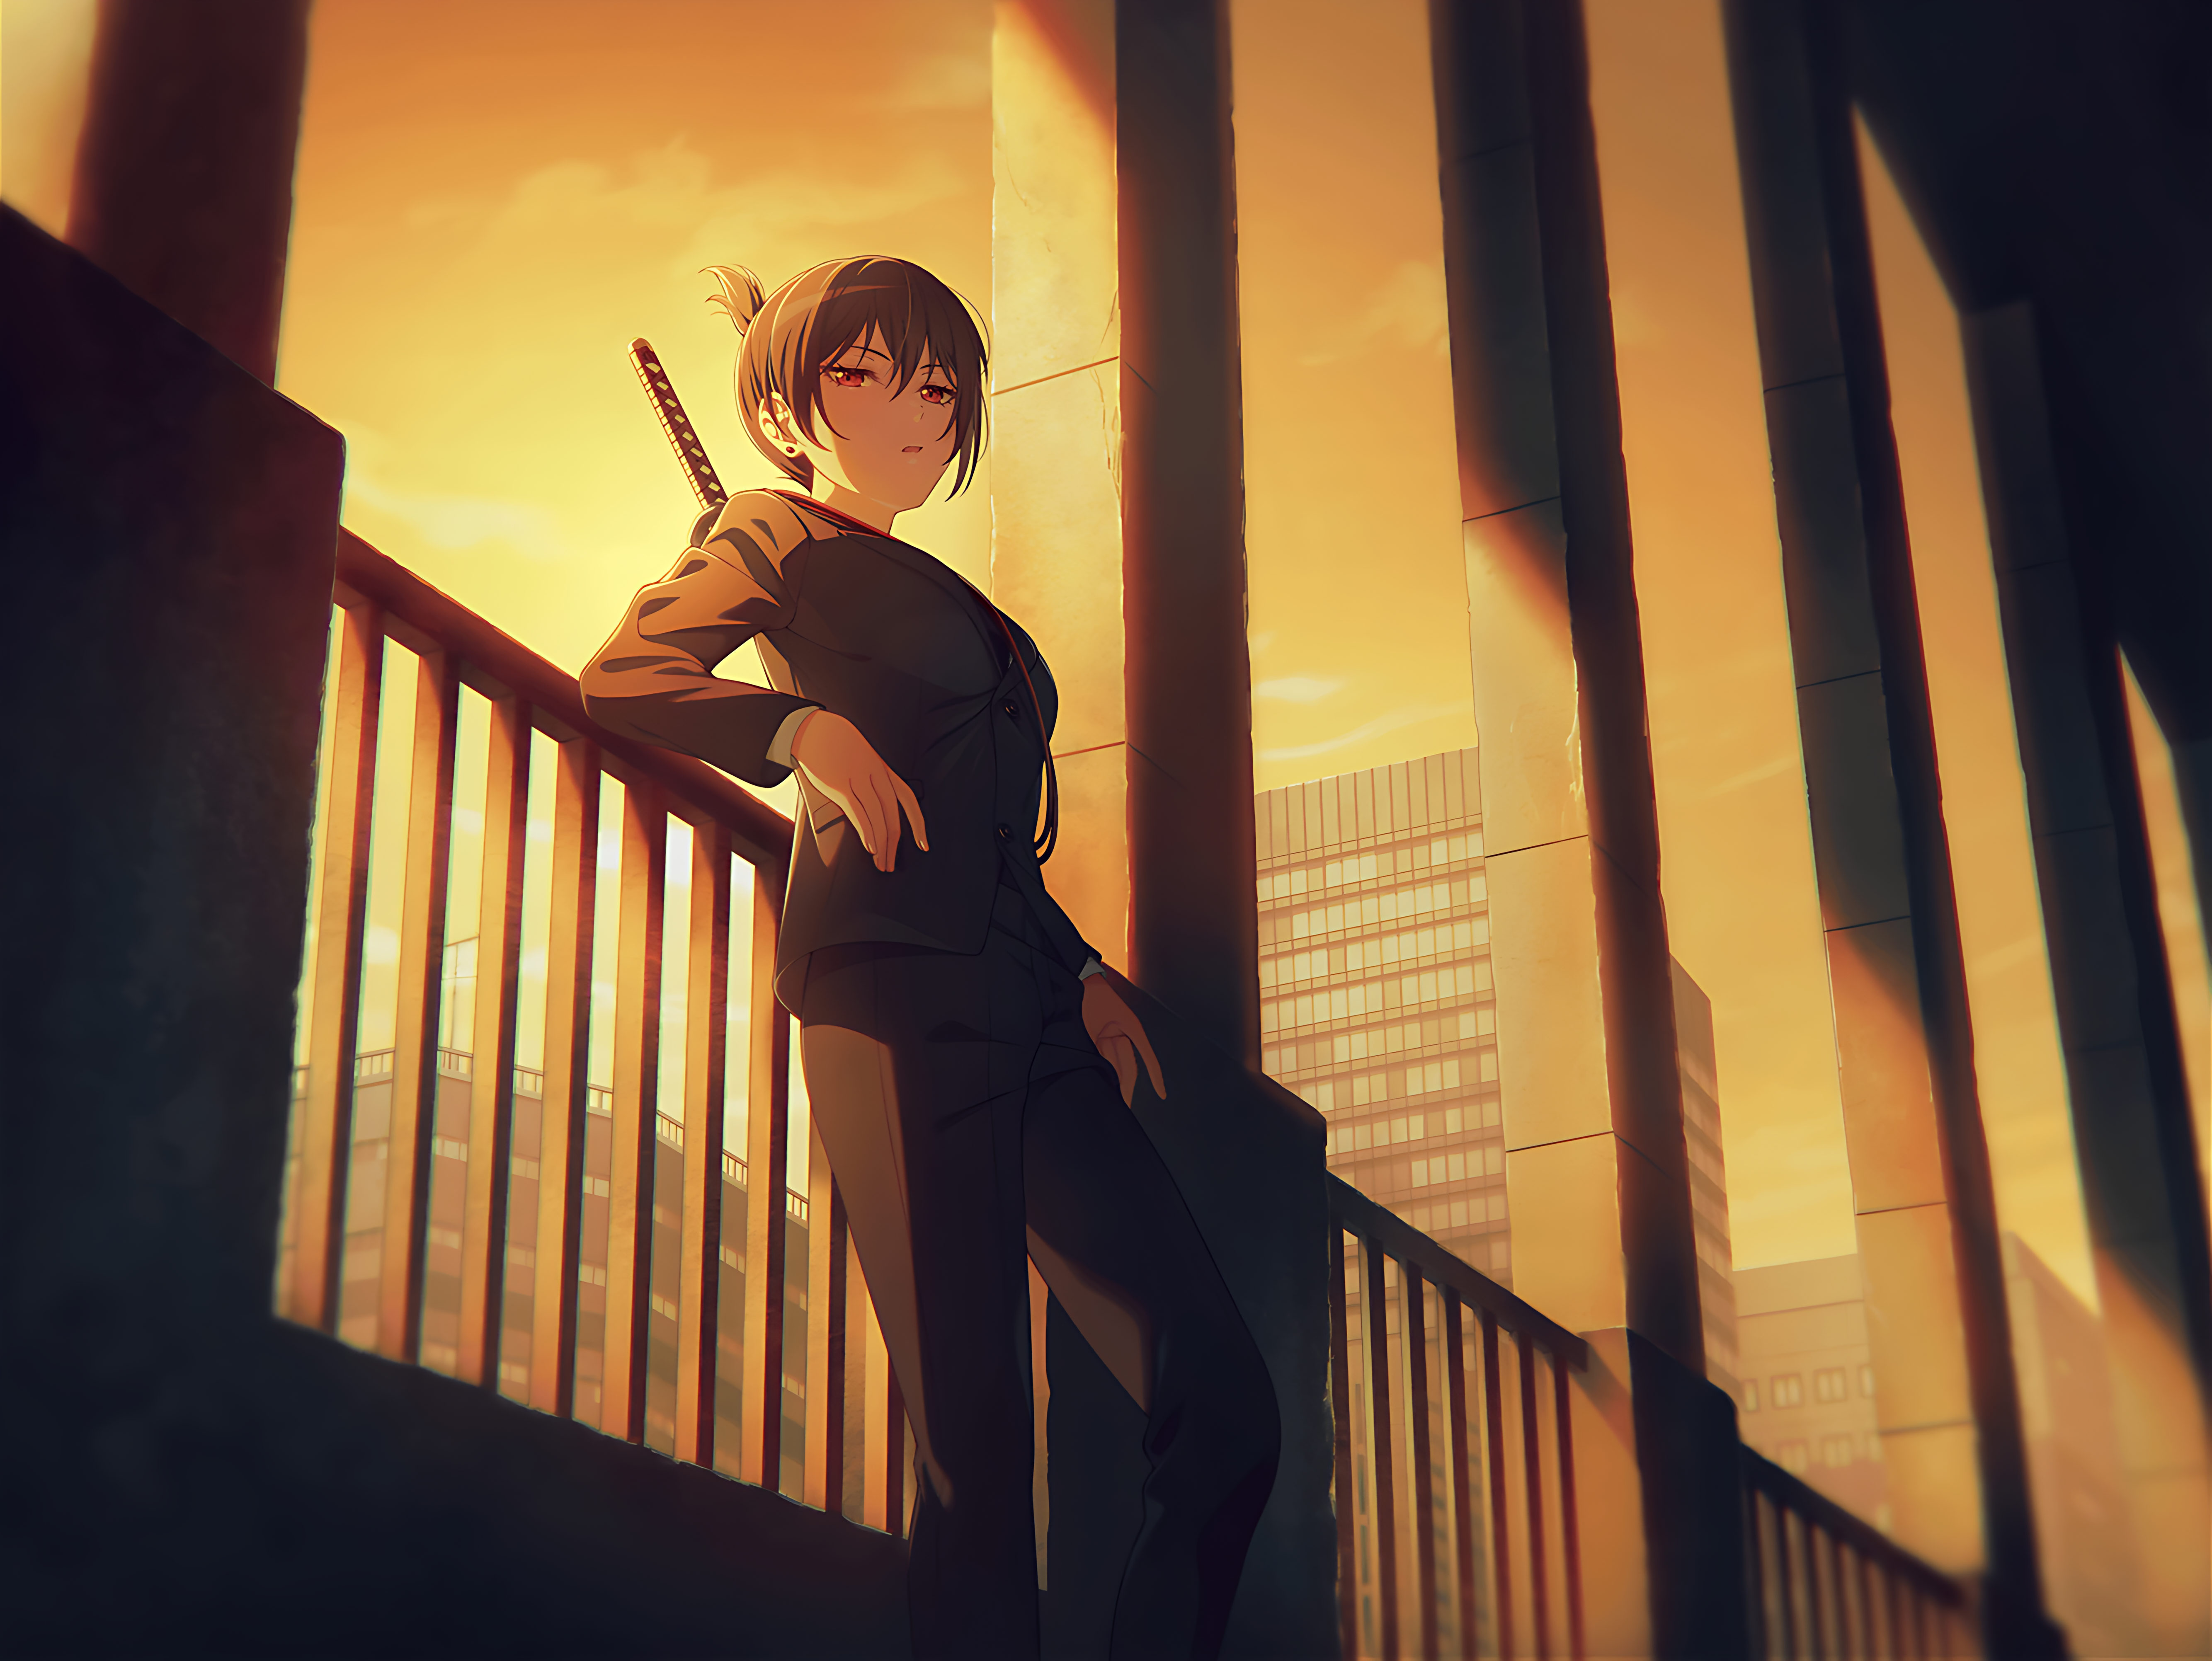 Anime 5336x4008 BanG Dream! anime anime girls Chainsaw Man Rui Yashio crossover uniform short hair looking at viewer sunset sunset glow standing building